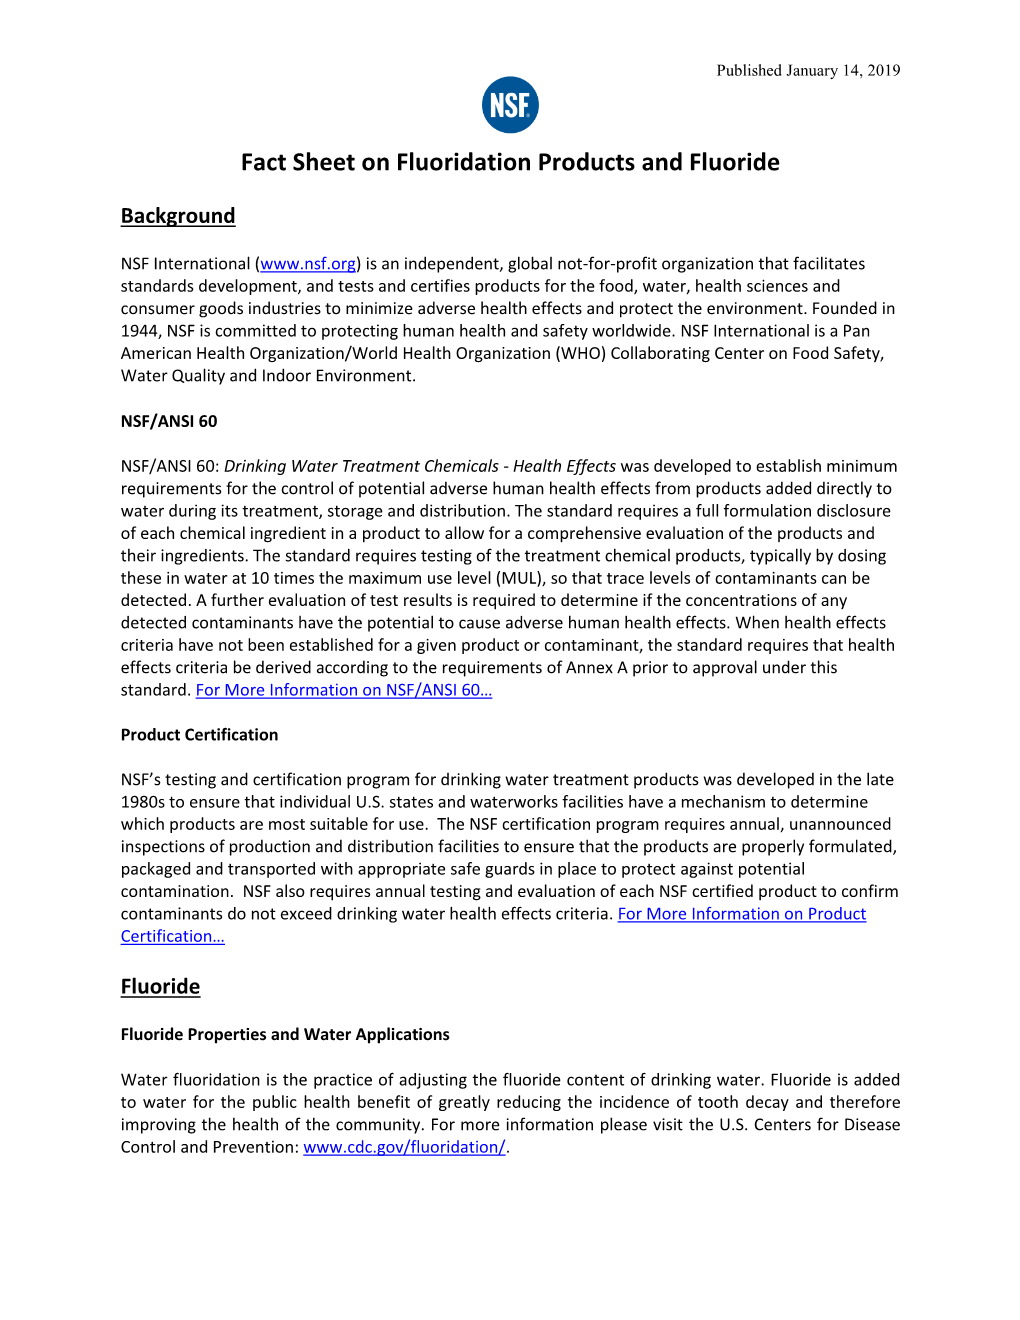 Fact Sheet on Fluoridation Products and Fluoride